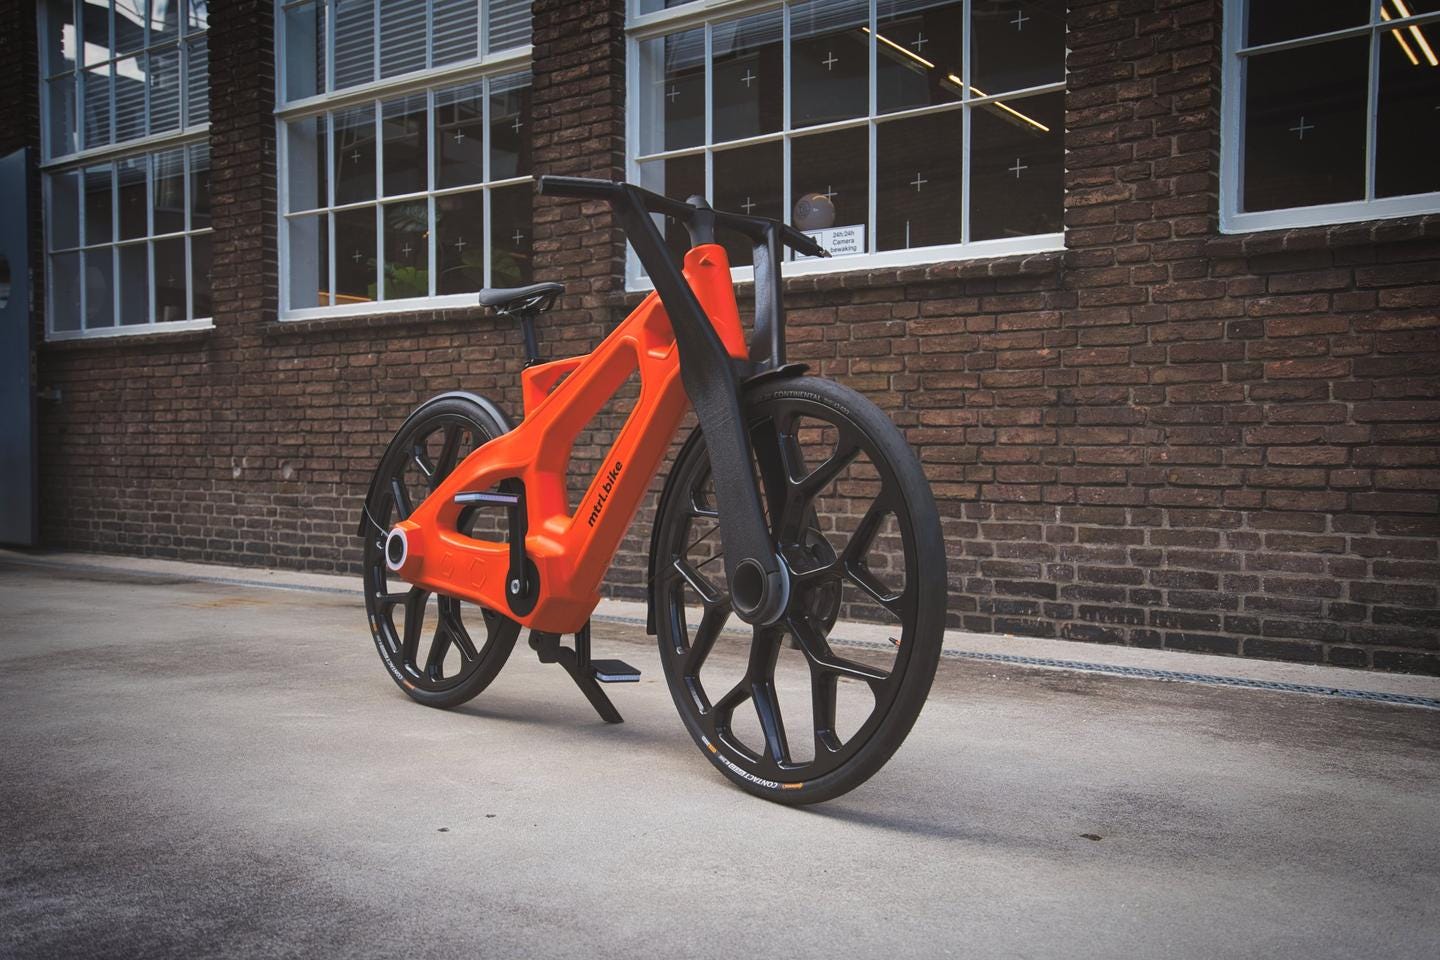 Dutch bike startup MTRL is planning to make the igus:bike available by the close of 2022